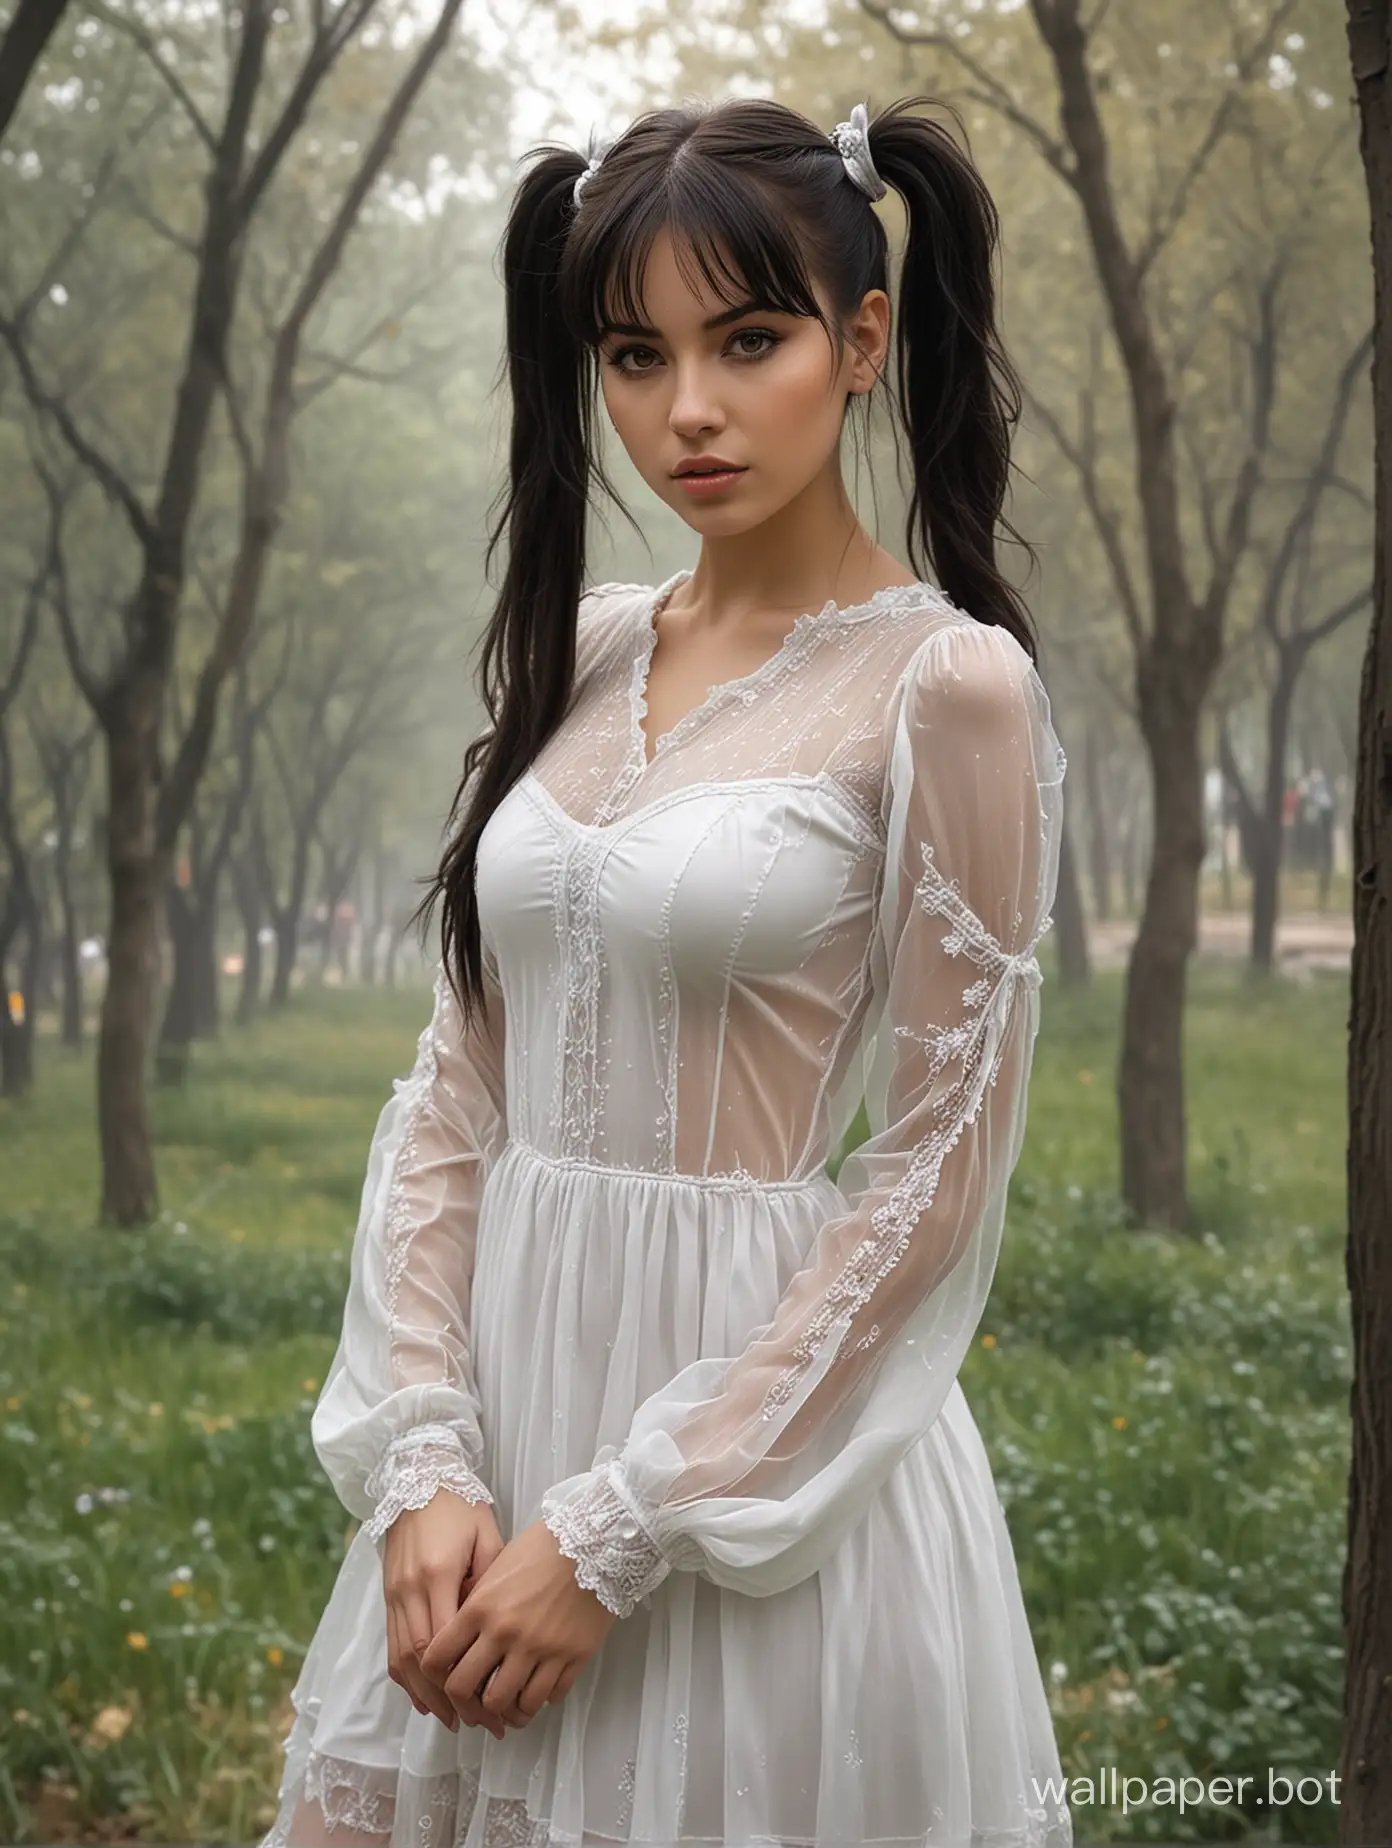 DarkHaired-Oksana-Pochepa-in-Transparent-Dress-with-Pigtails-High-Realism-Portrait-by-Luis-Royo